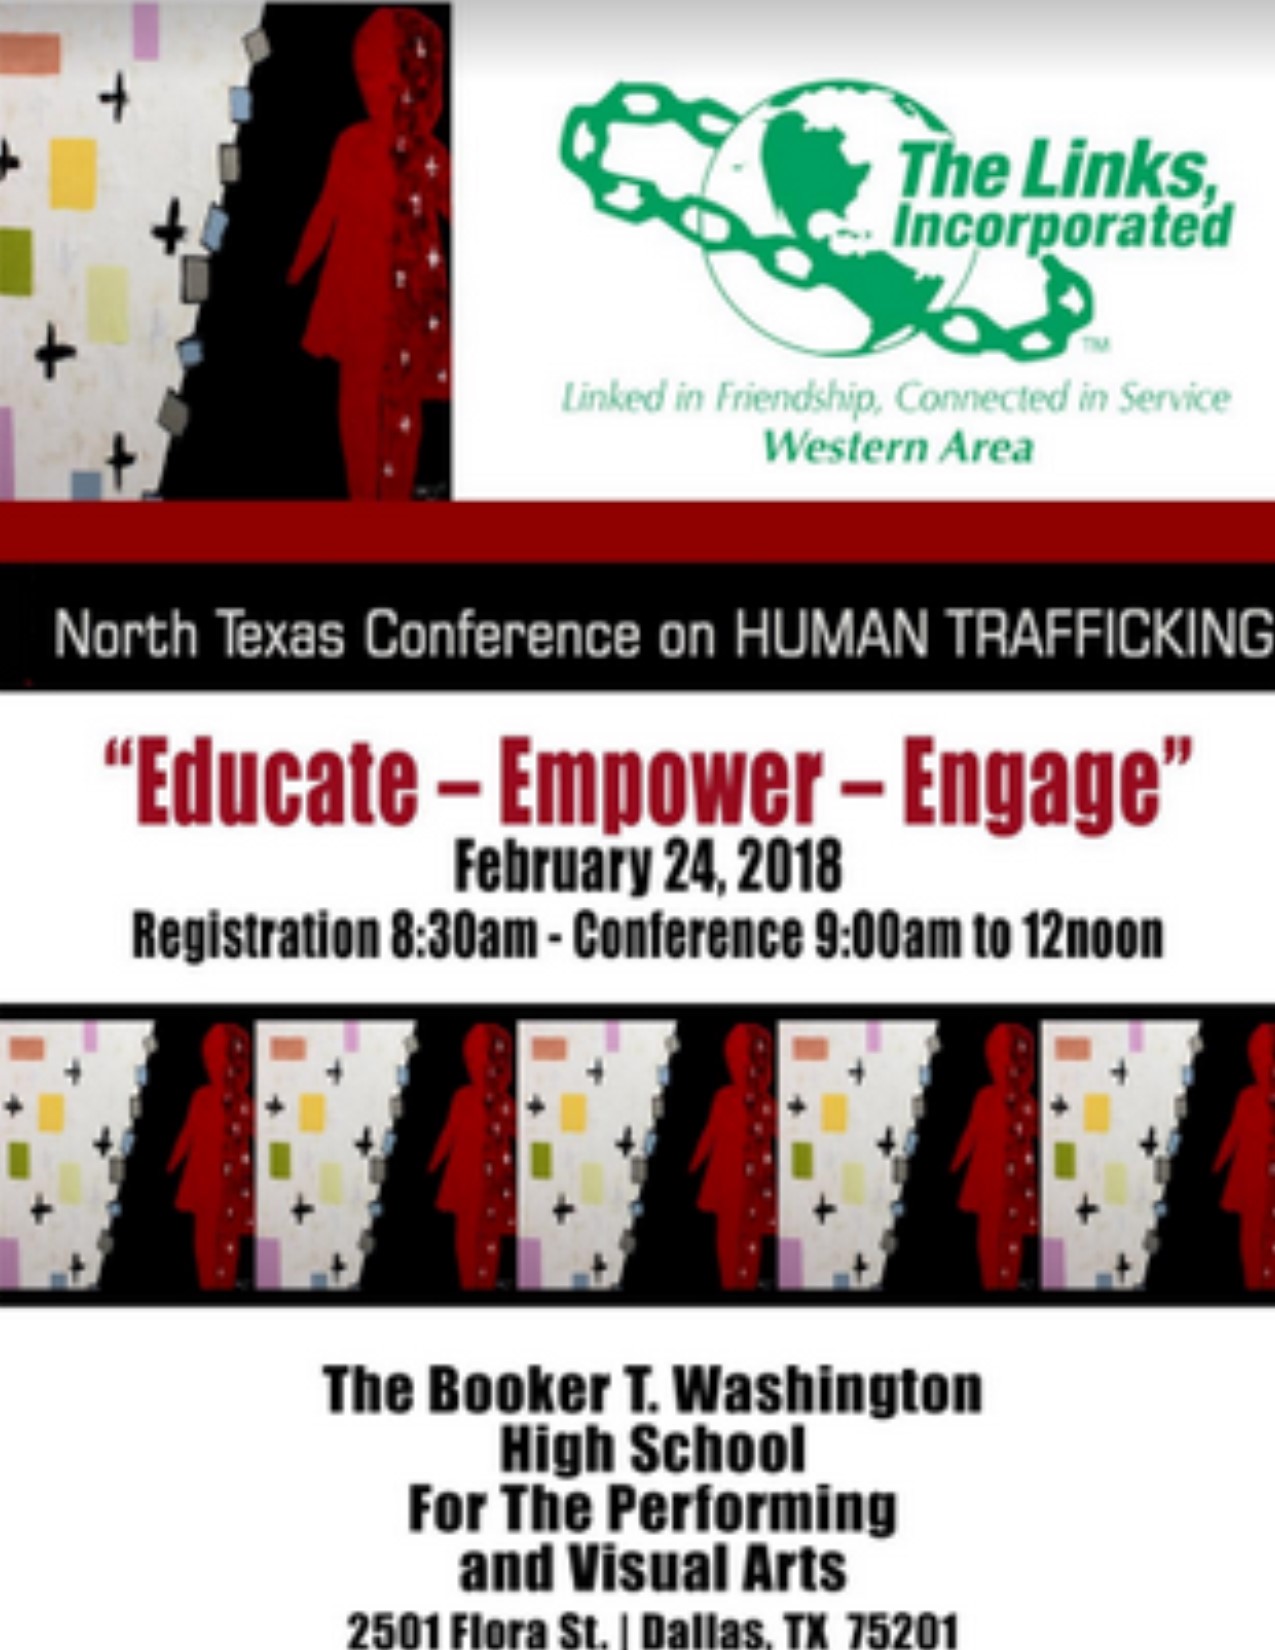 North Texas Conference on Human Trafficking to be held on 2/24